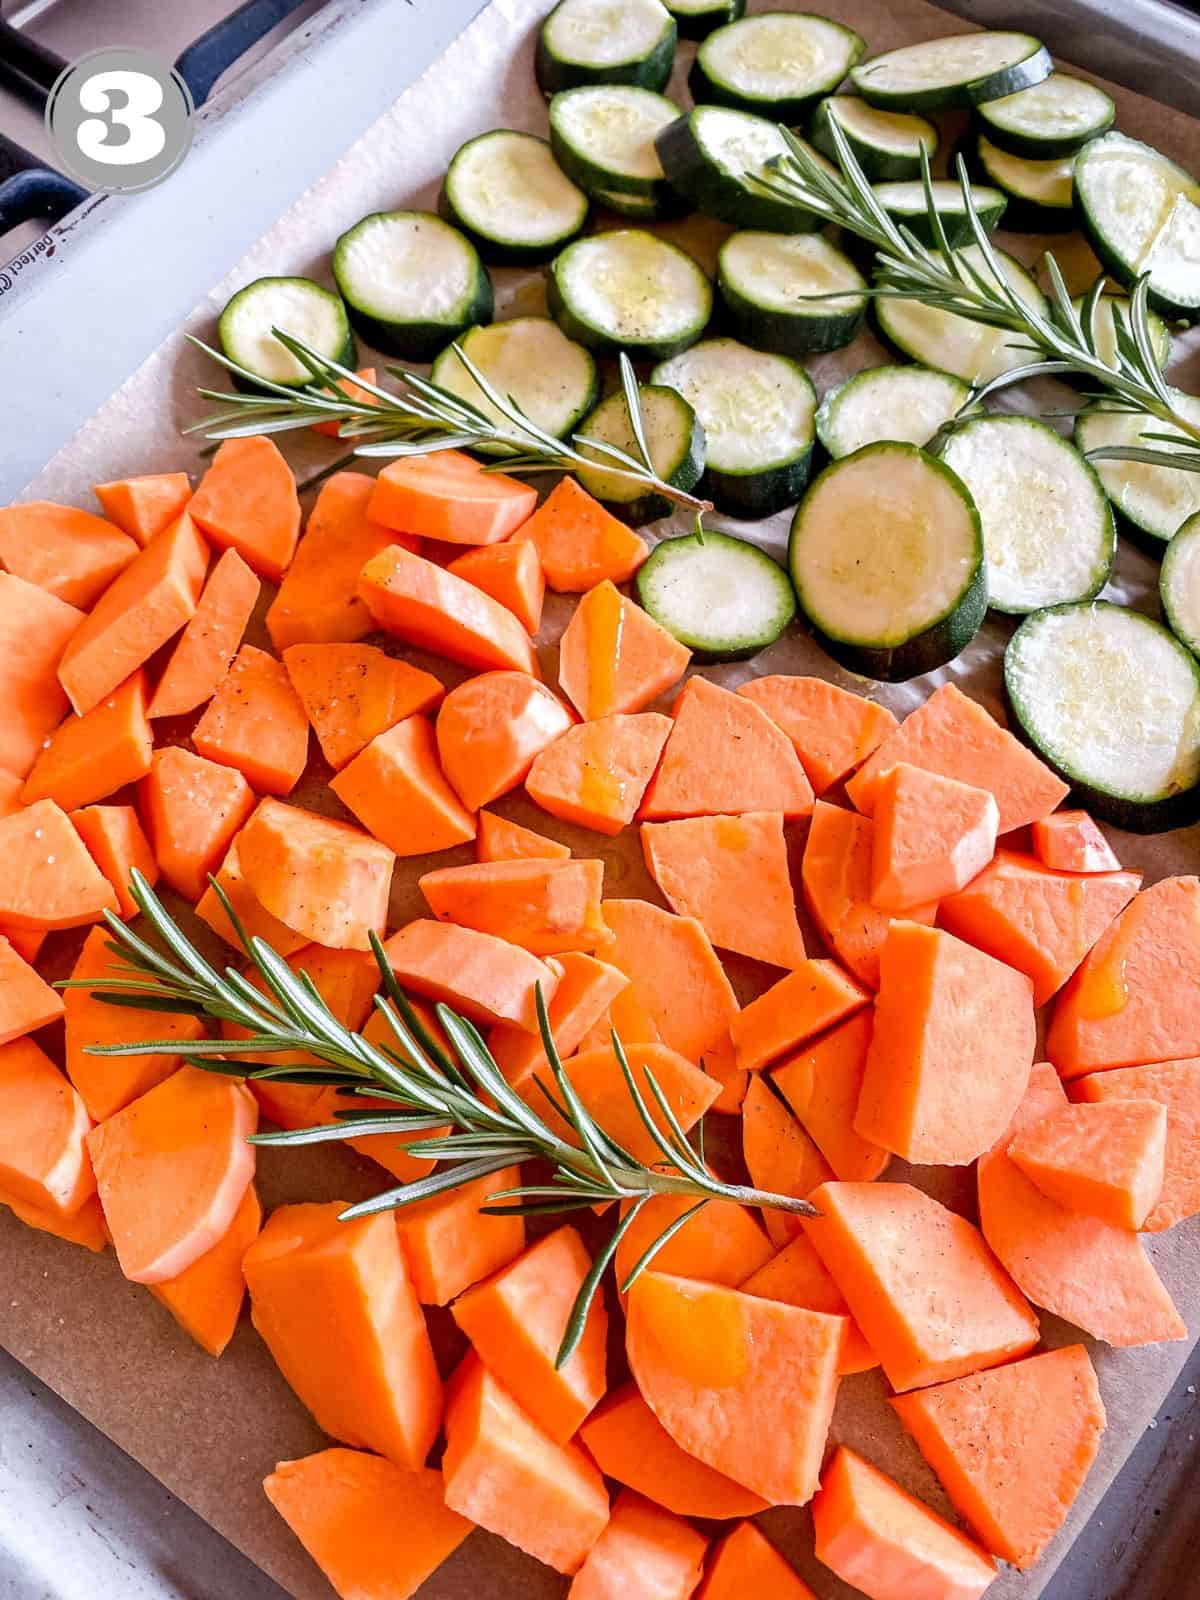 diced sweet potato, zucchini and rosemary on a lined baking tray labelled number three.